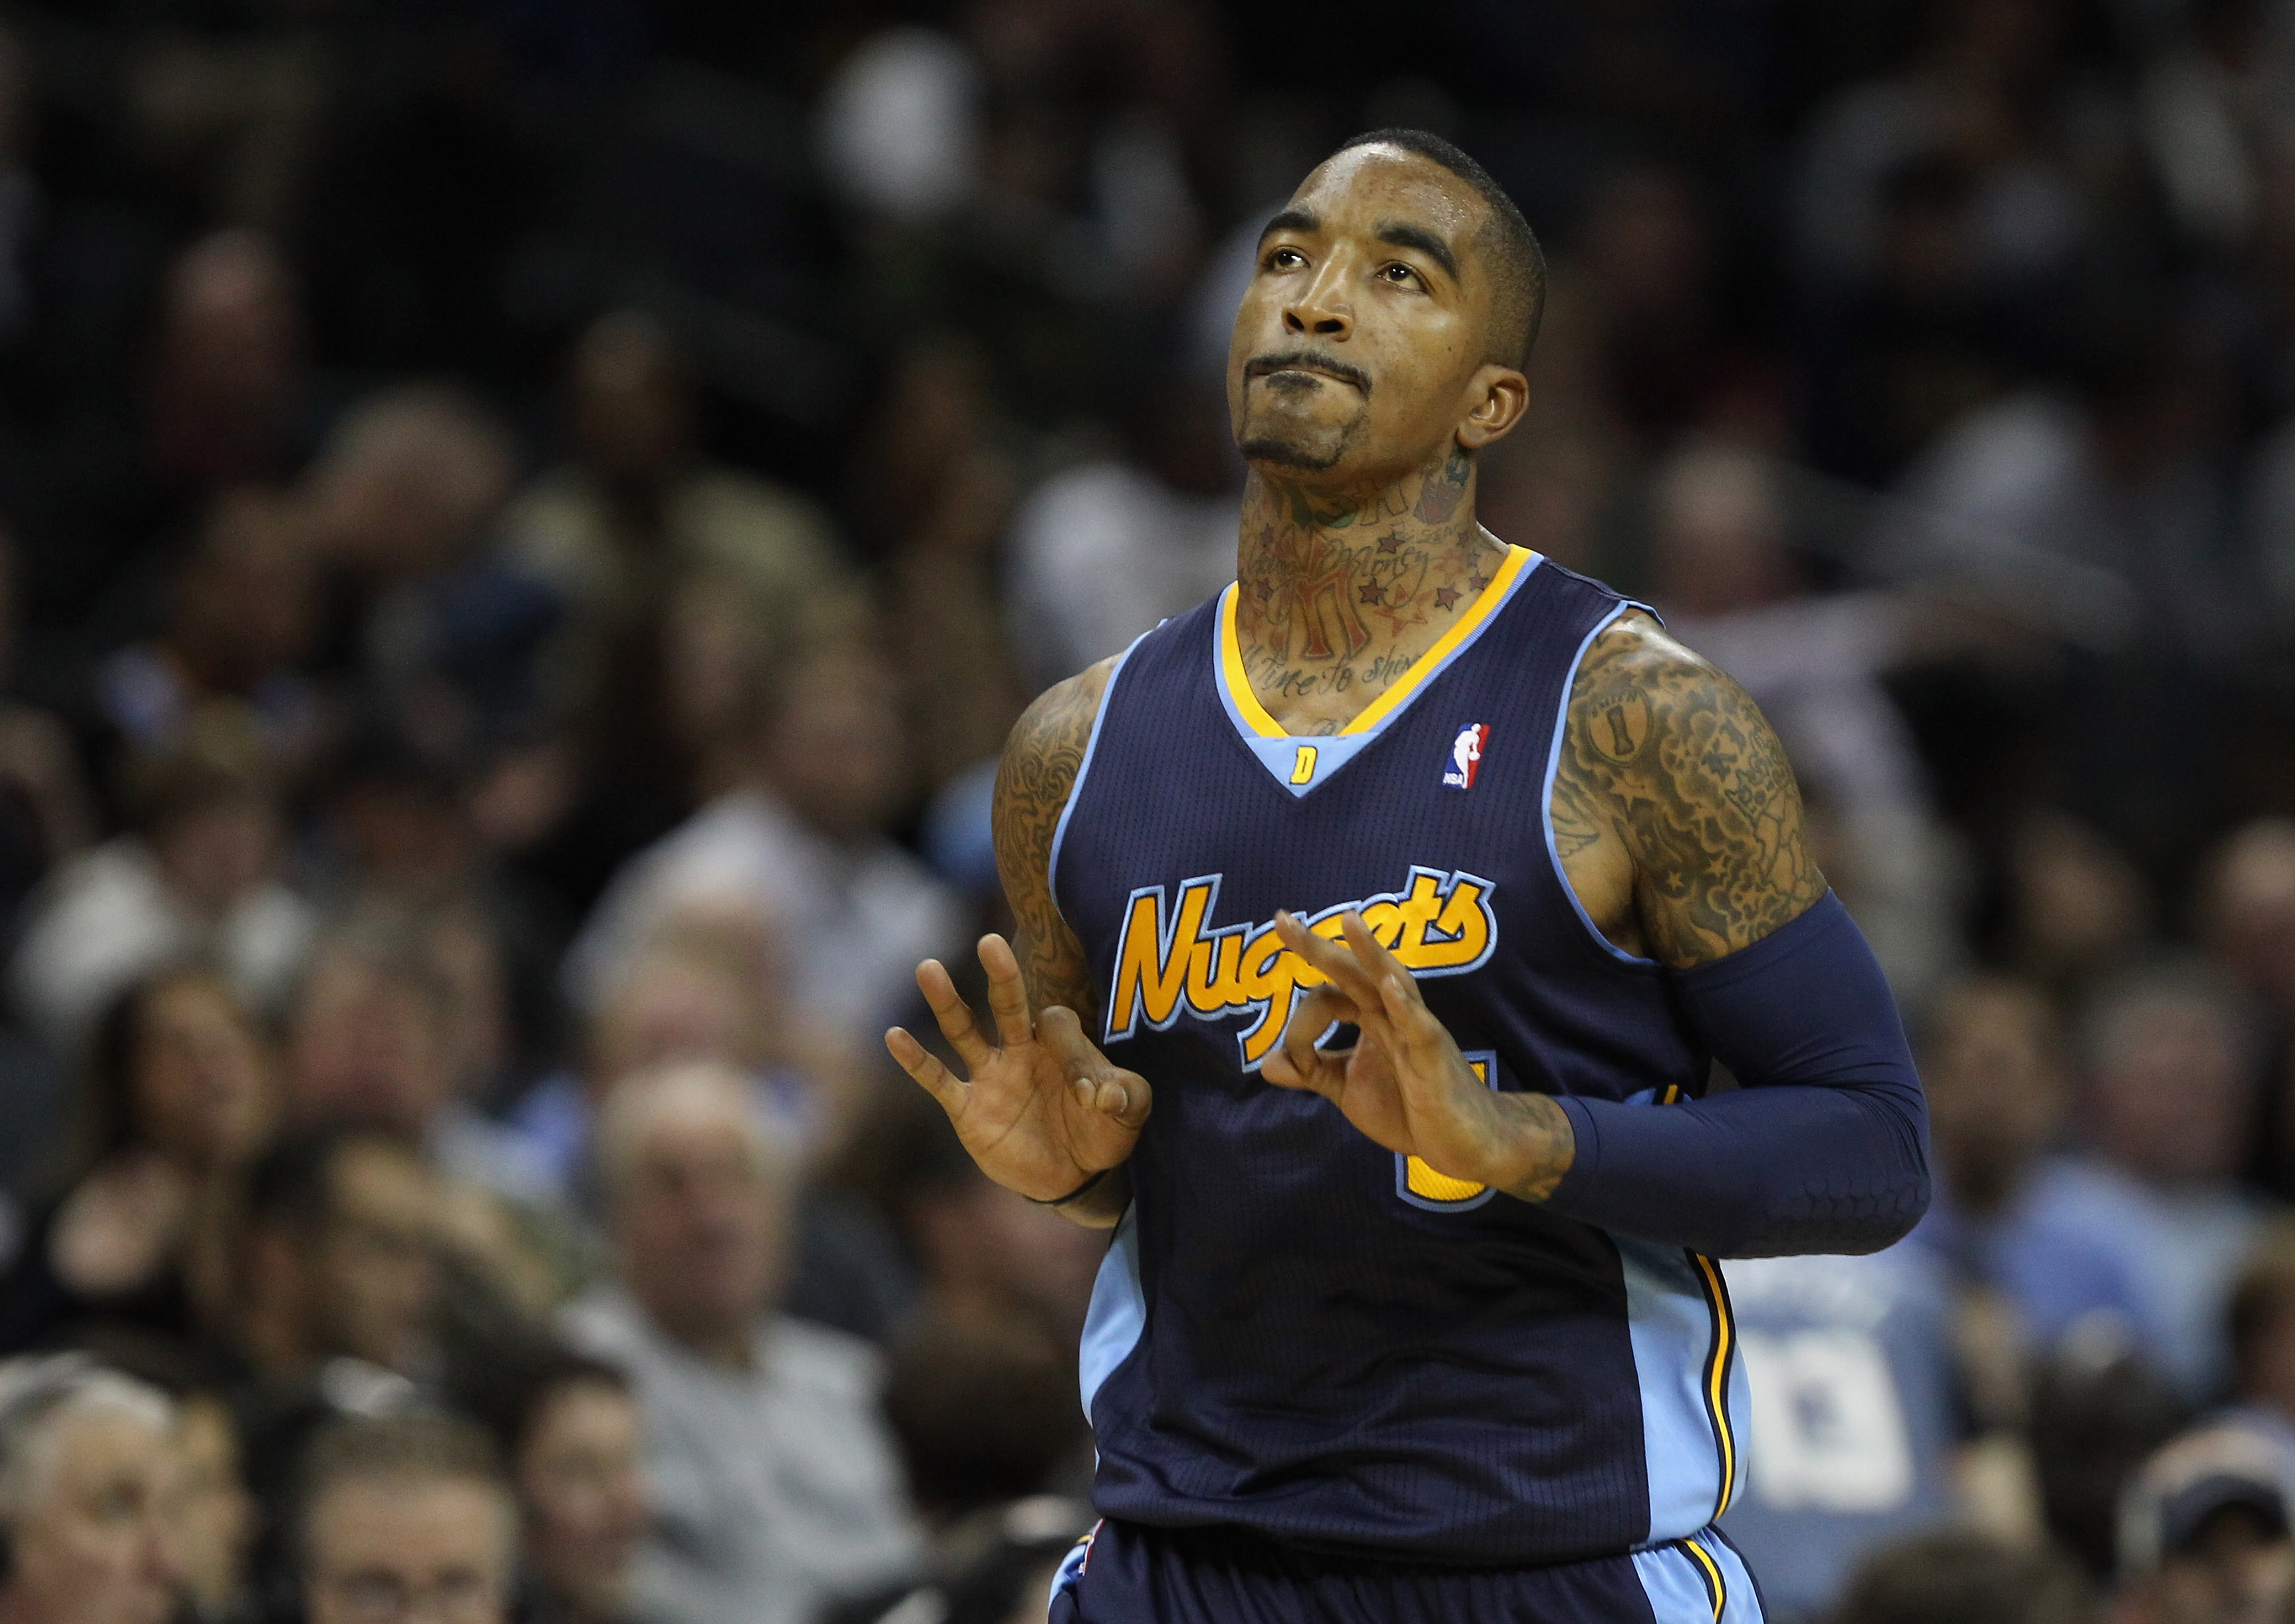 CHARLOTTE, NC - DECEMBER 07:  J.R. Smith #5 of the Denver Nuggets celebrates after making a basket against the Charlotte Bobcats during their game at Time Warner Cable Arena on December 7, 2010 in Charlotte, North Carolina.  NOTE TO USER: User expressly a